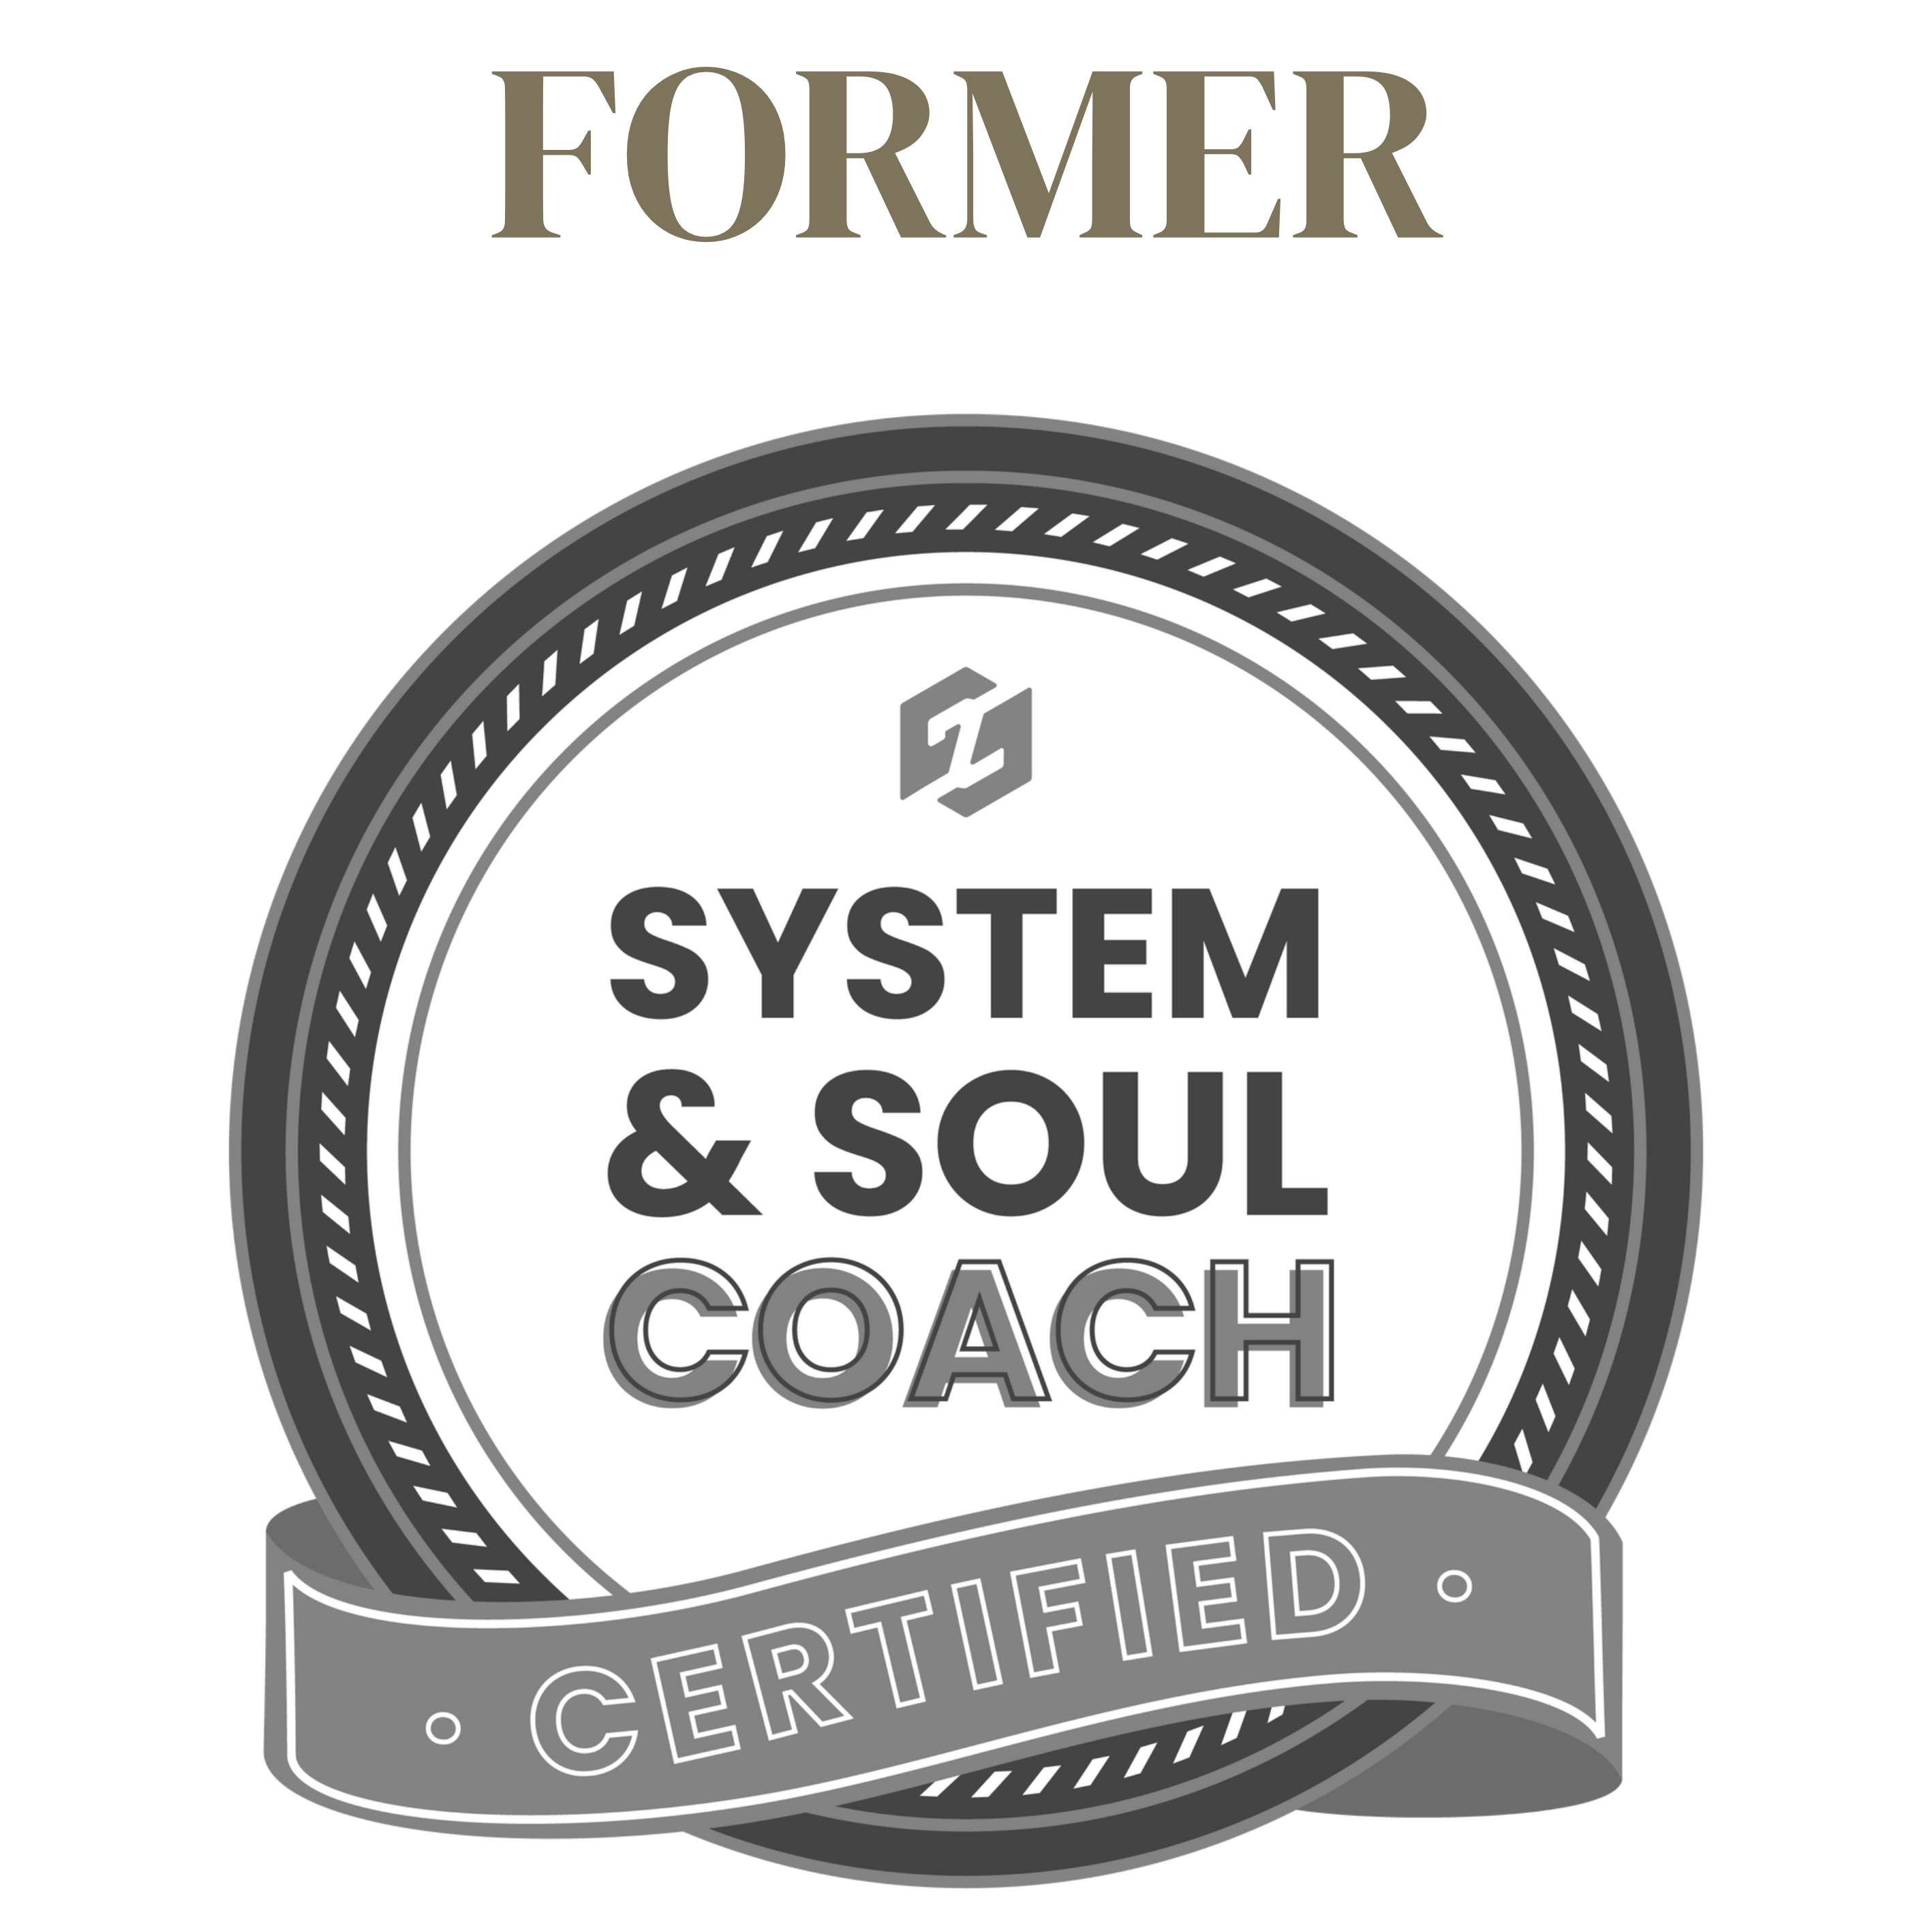 Badge showing System & Soul coach certified with Former above it